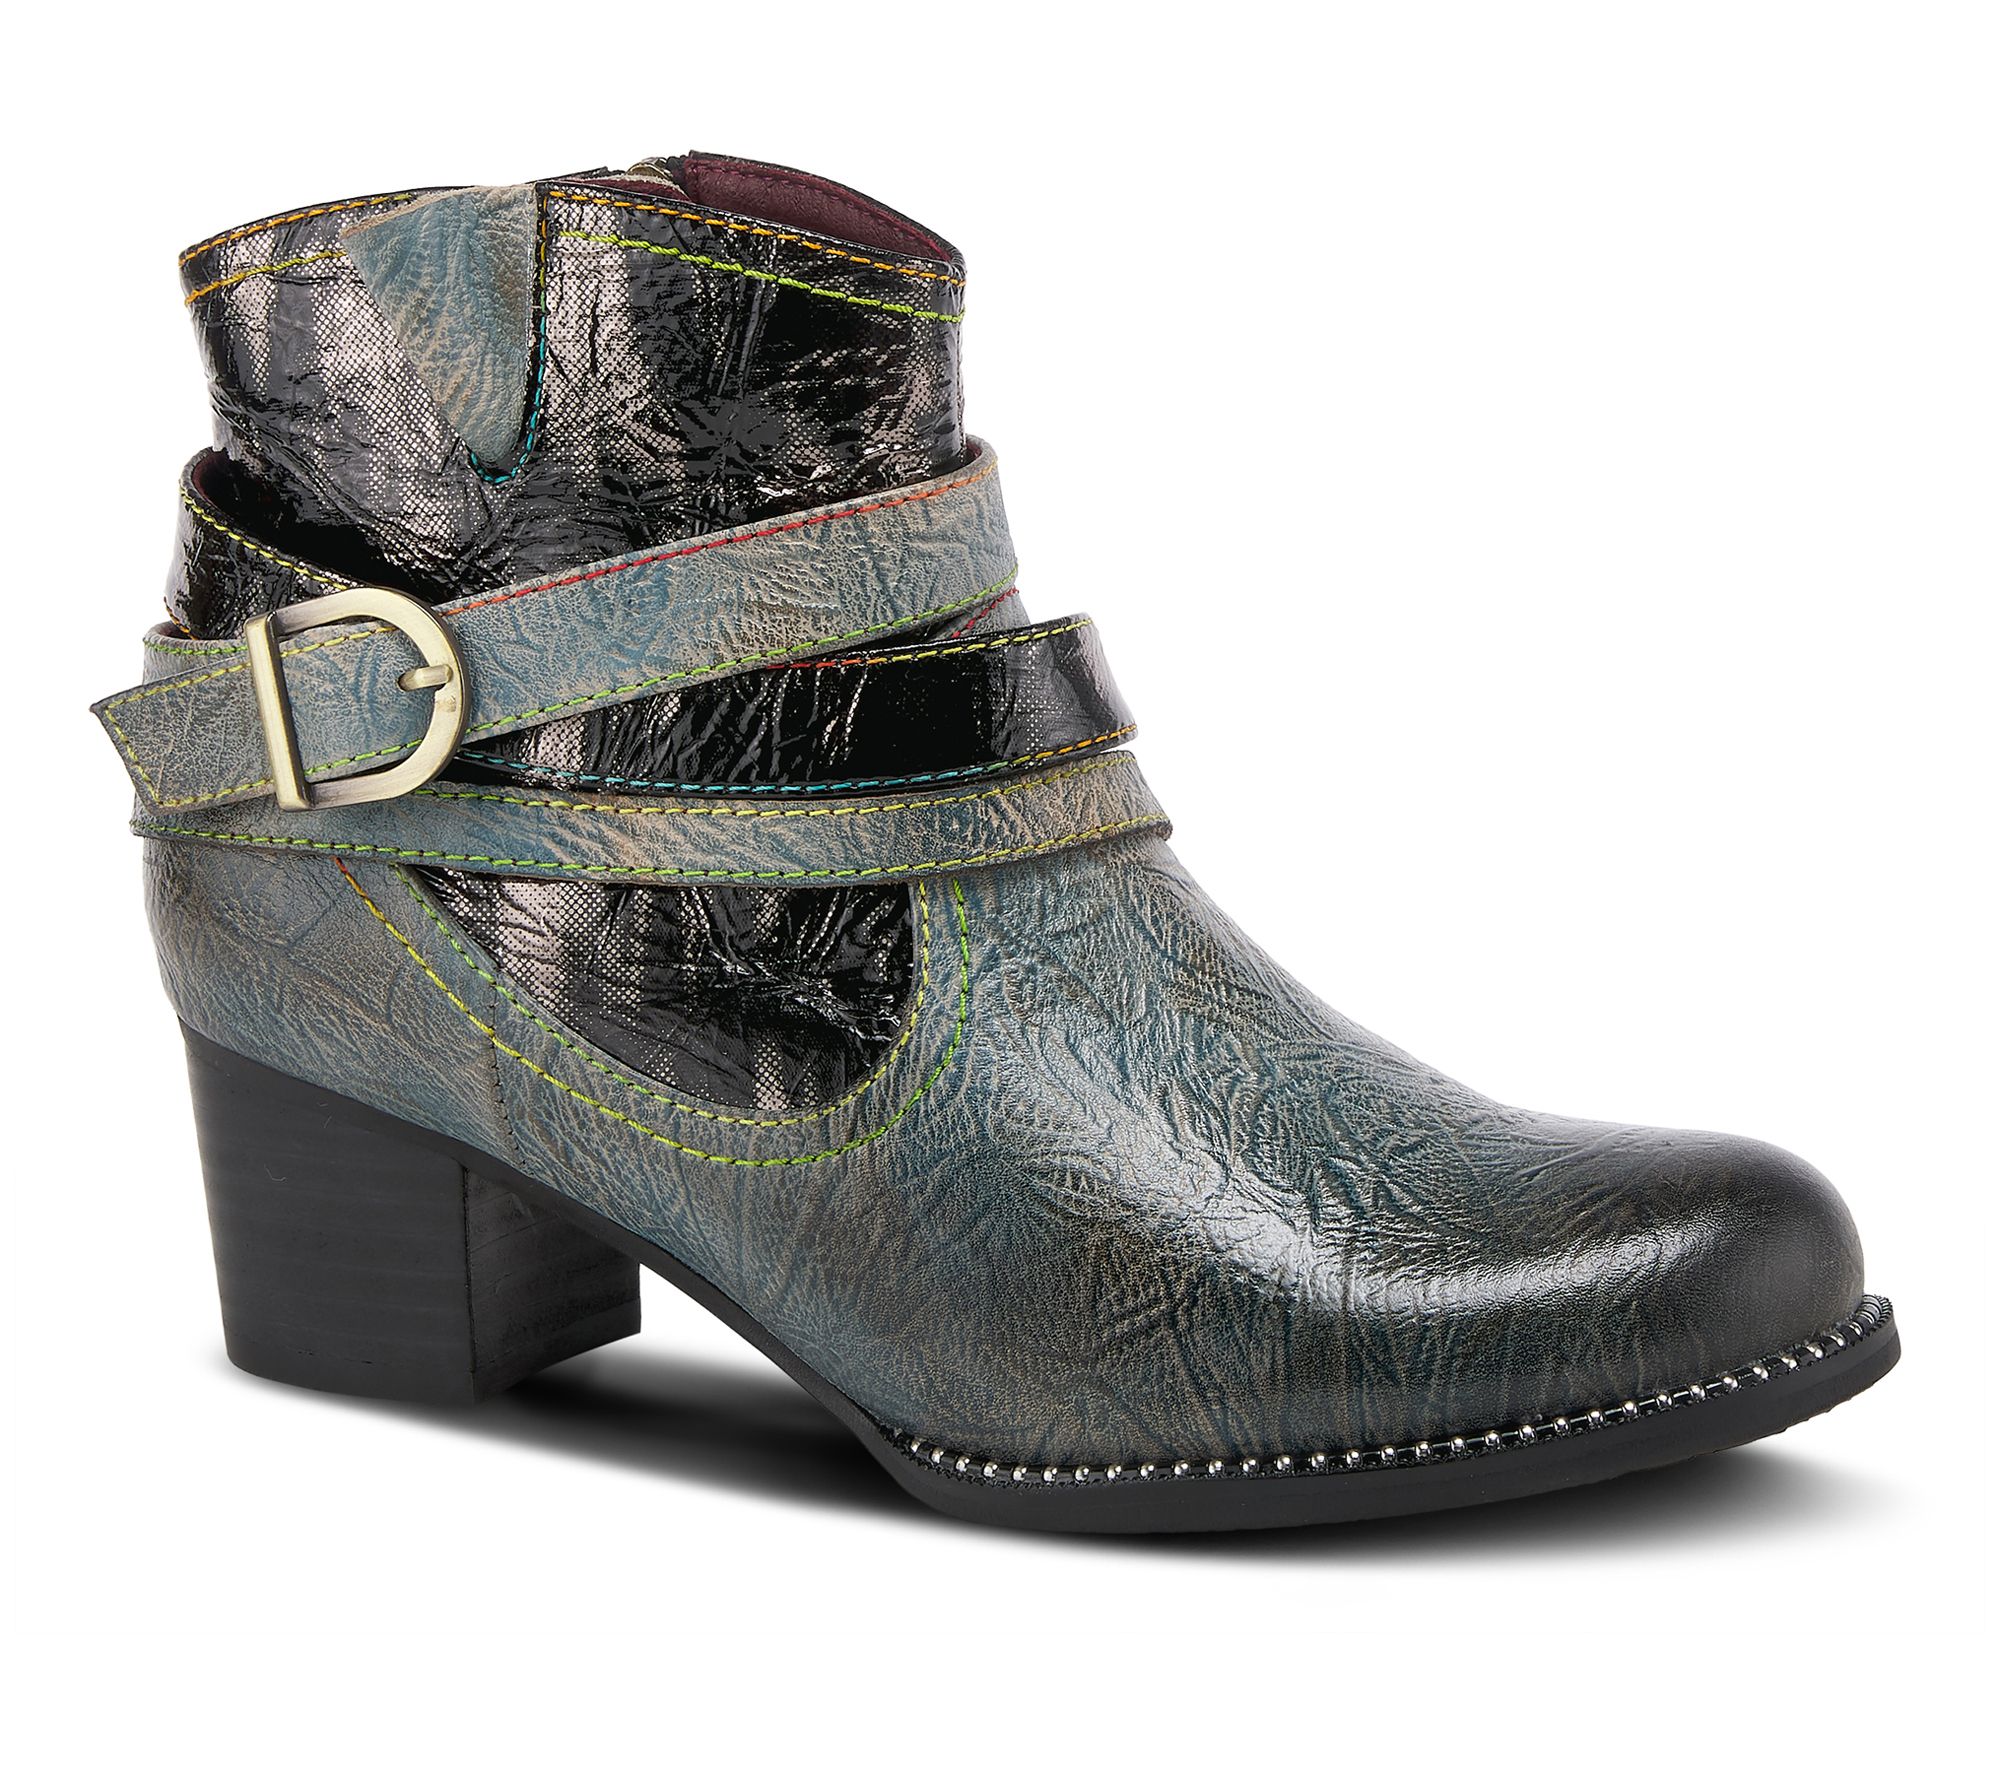 L'Artiste by Spring Step Leather Boots - Zhamsh-Shine - QVC.com